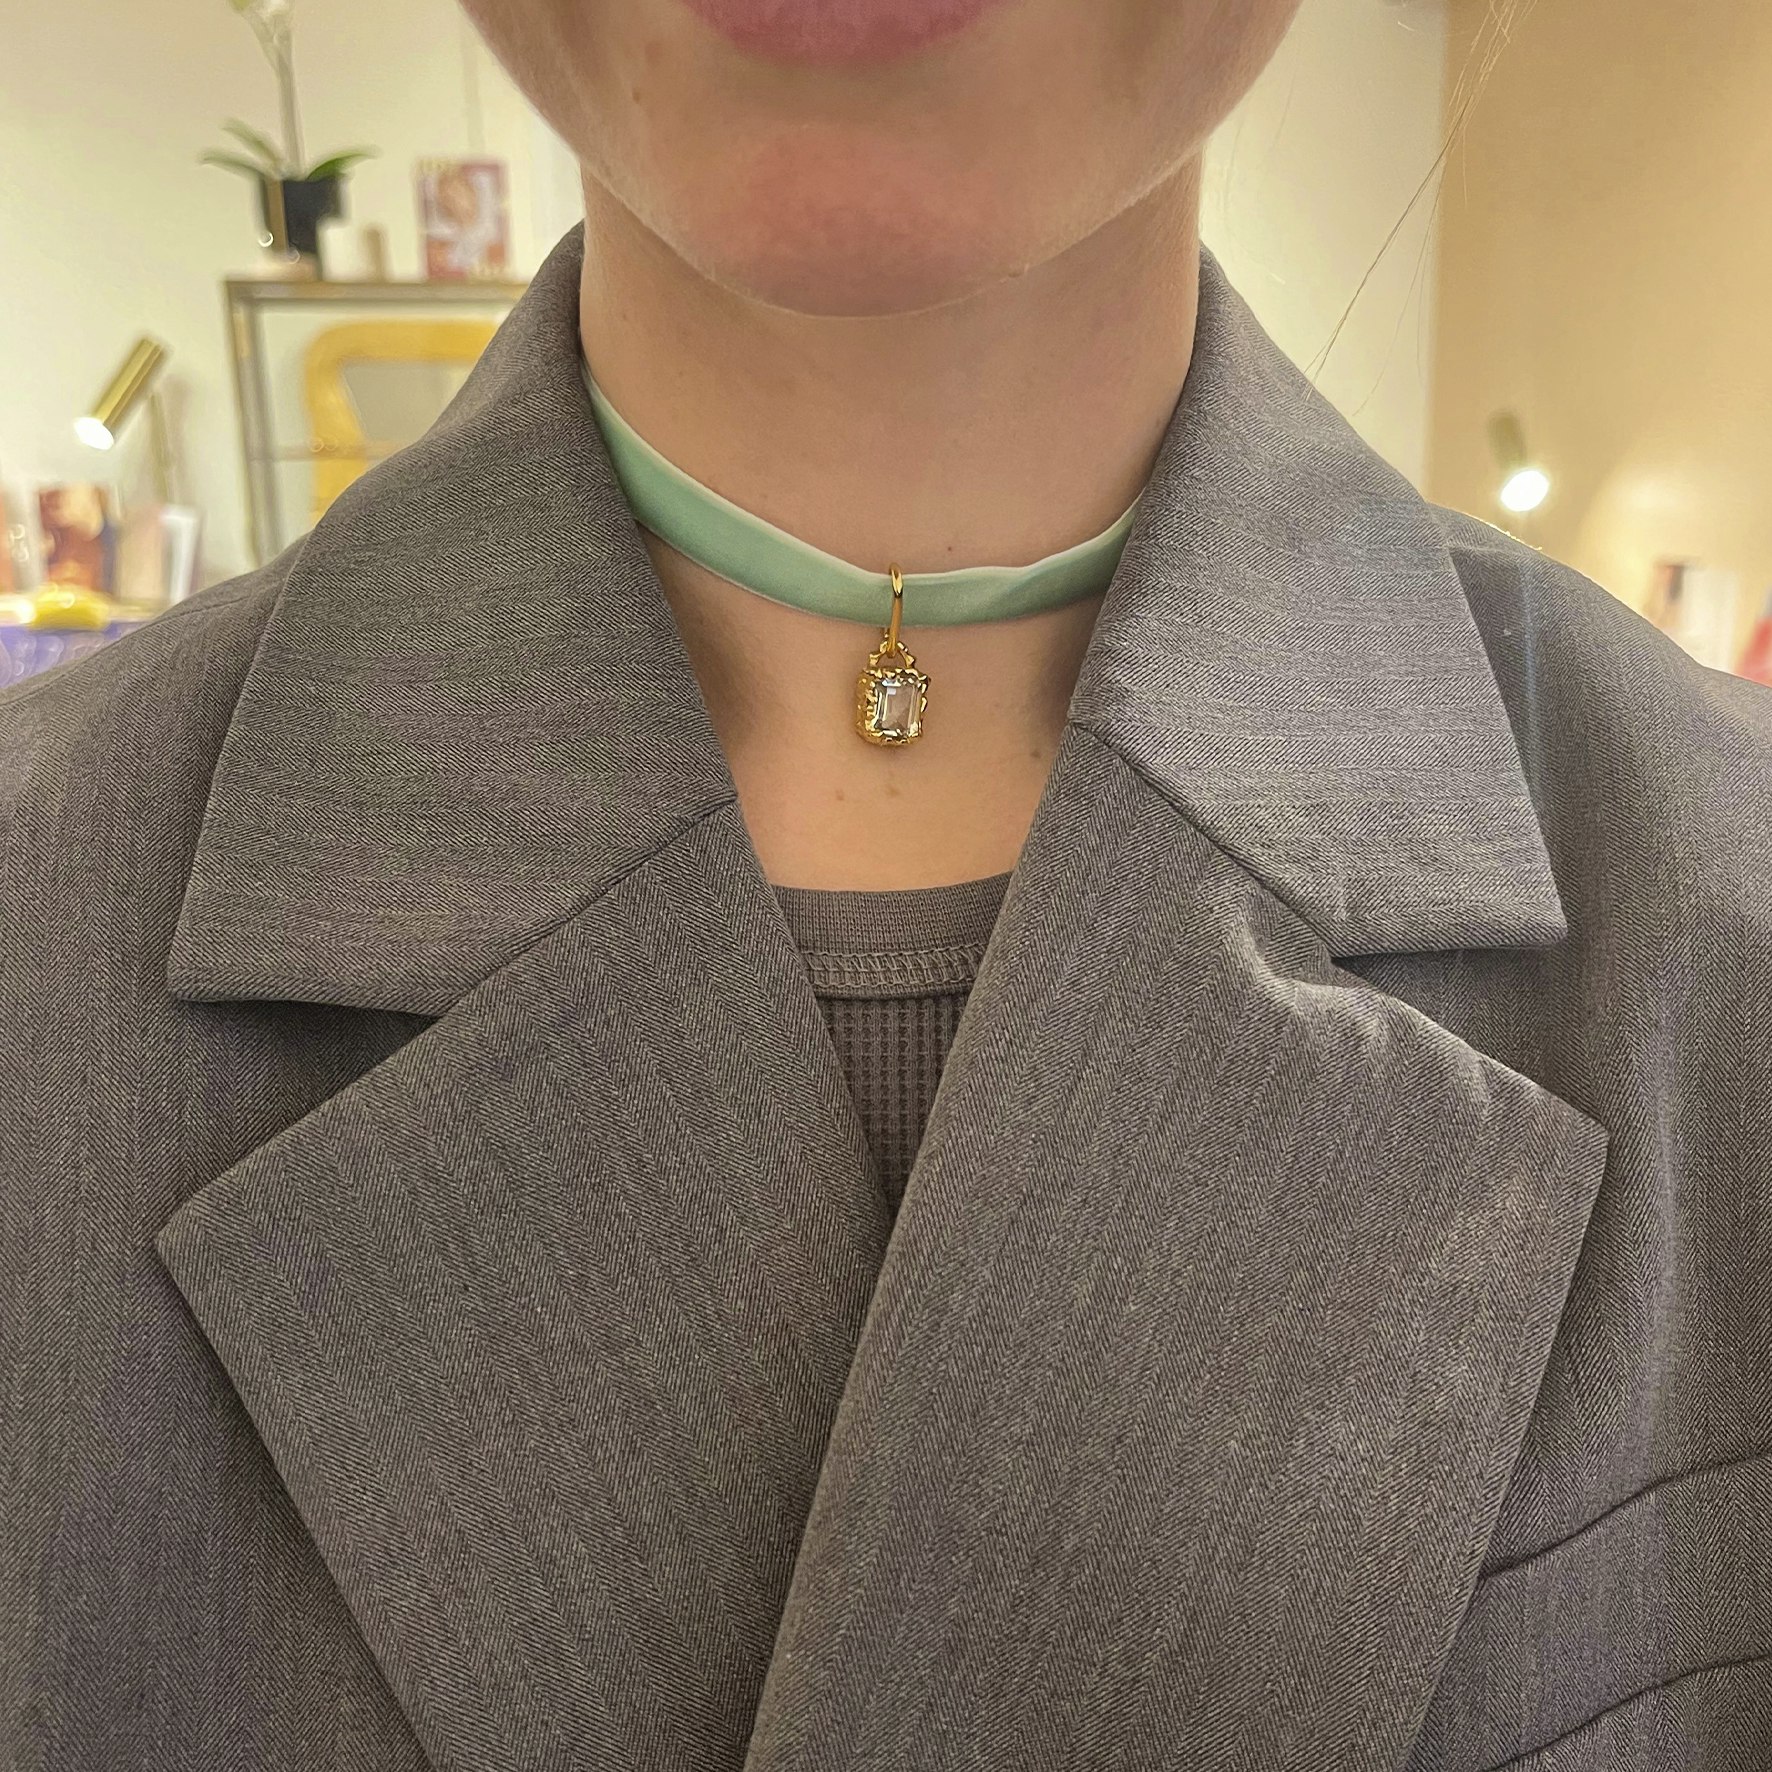 String Of Prosperity Necklace Choker Green Amethyst from House Of Vincent in Goldplated Silver Sterling 925